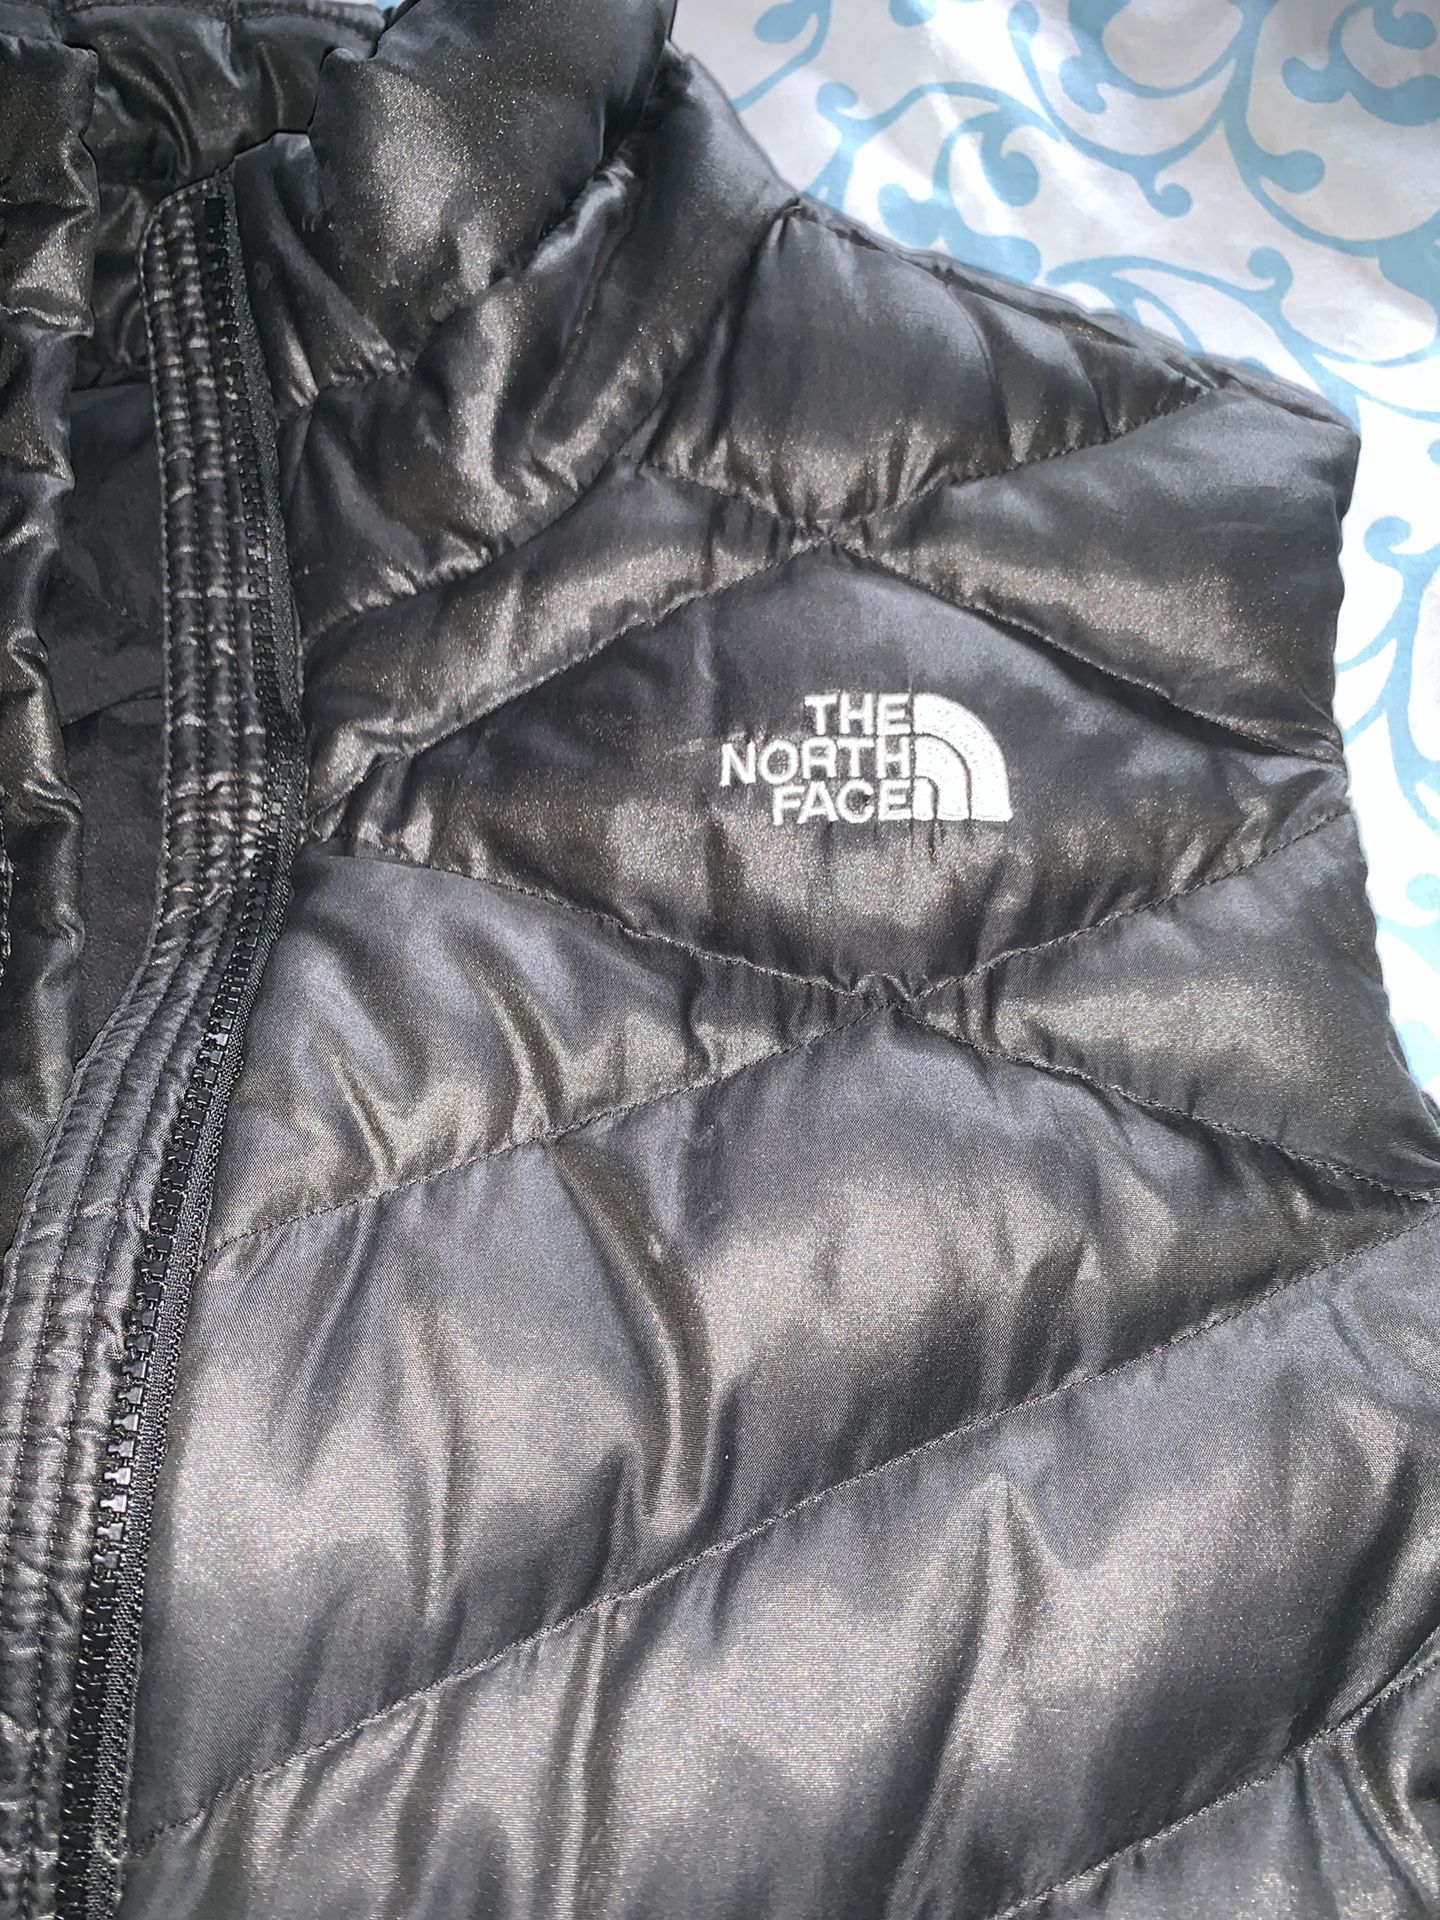 Gently used Authentic North Face vest size xl women